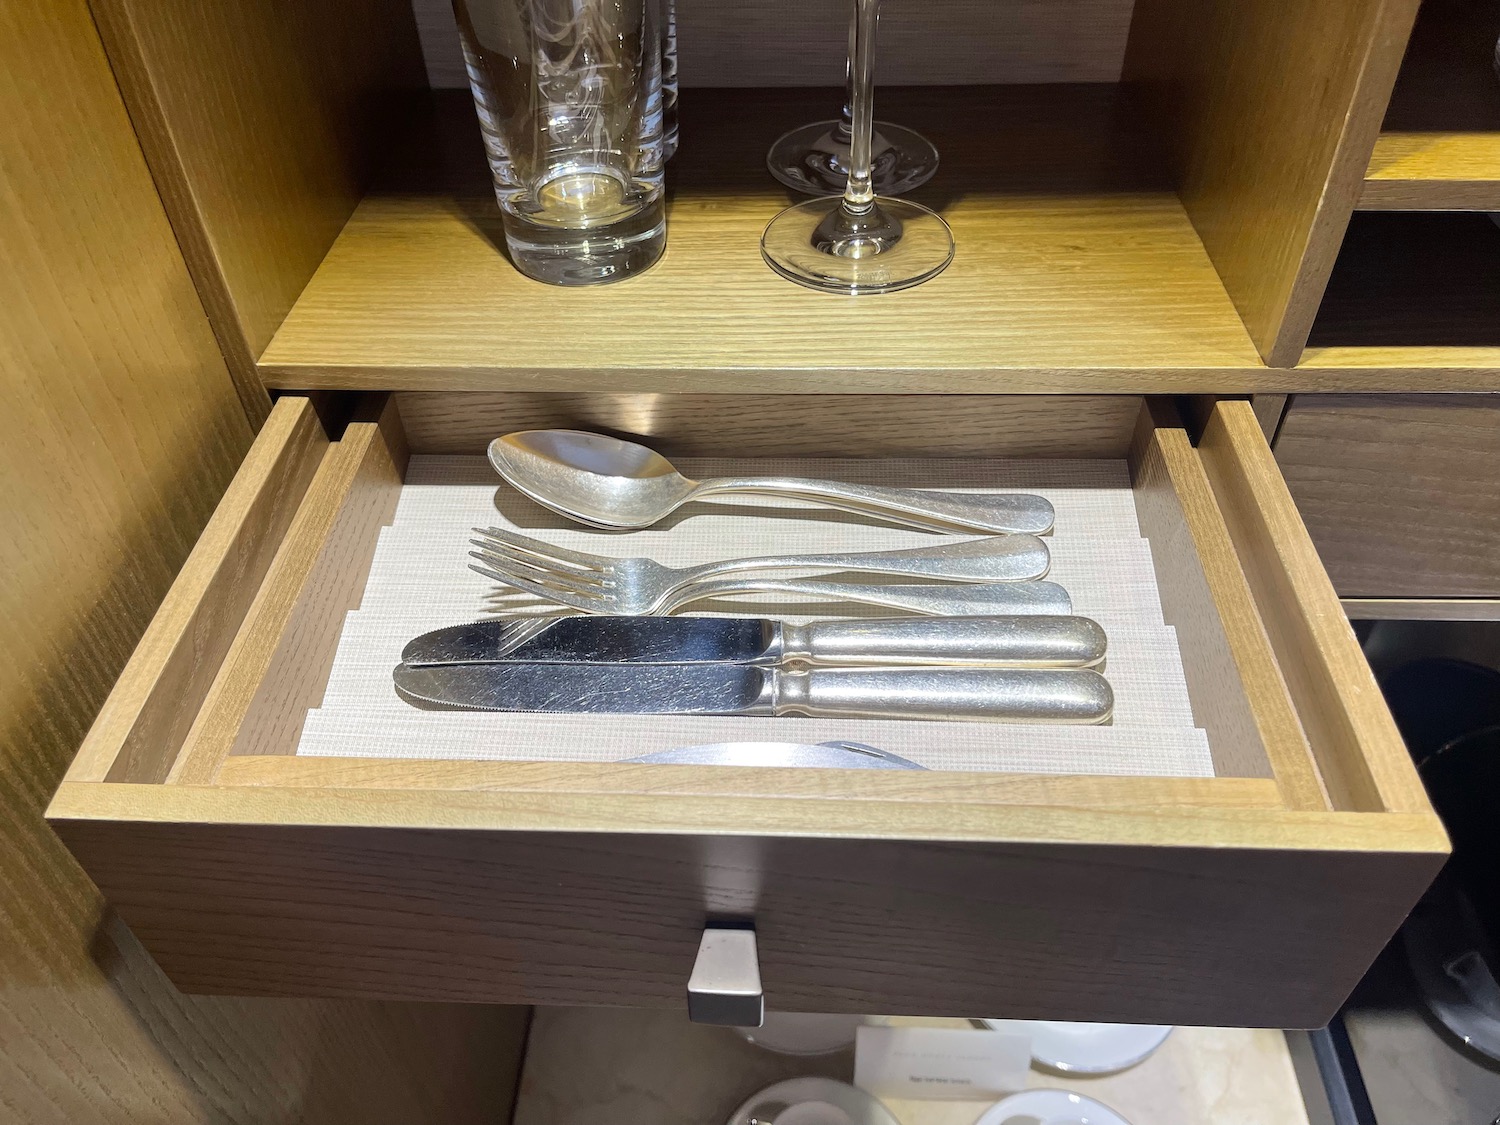 a drawer with silverware and glasses